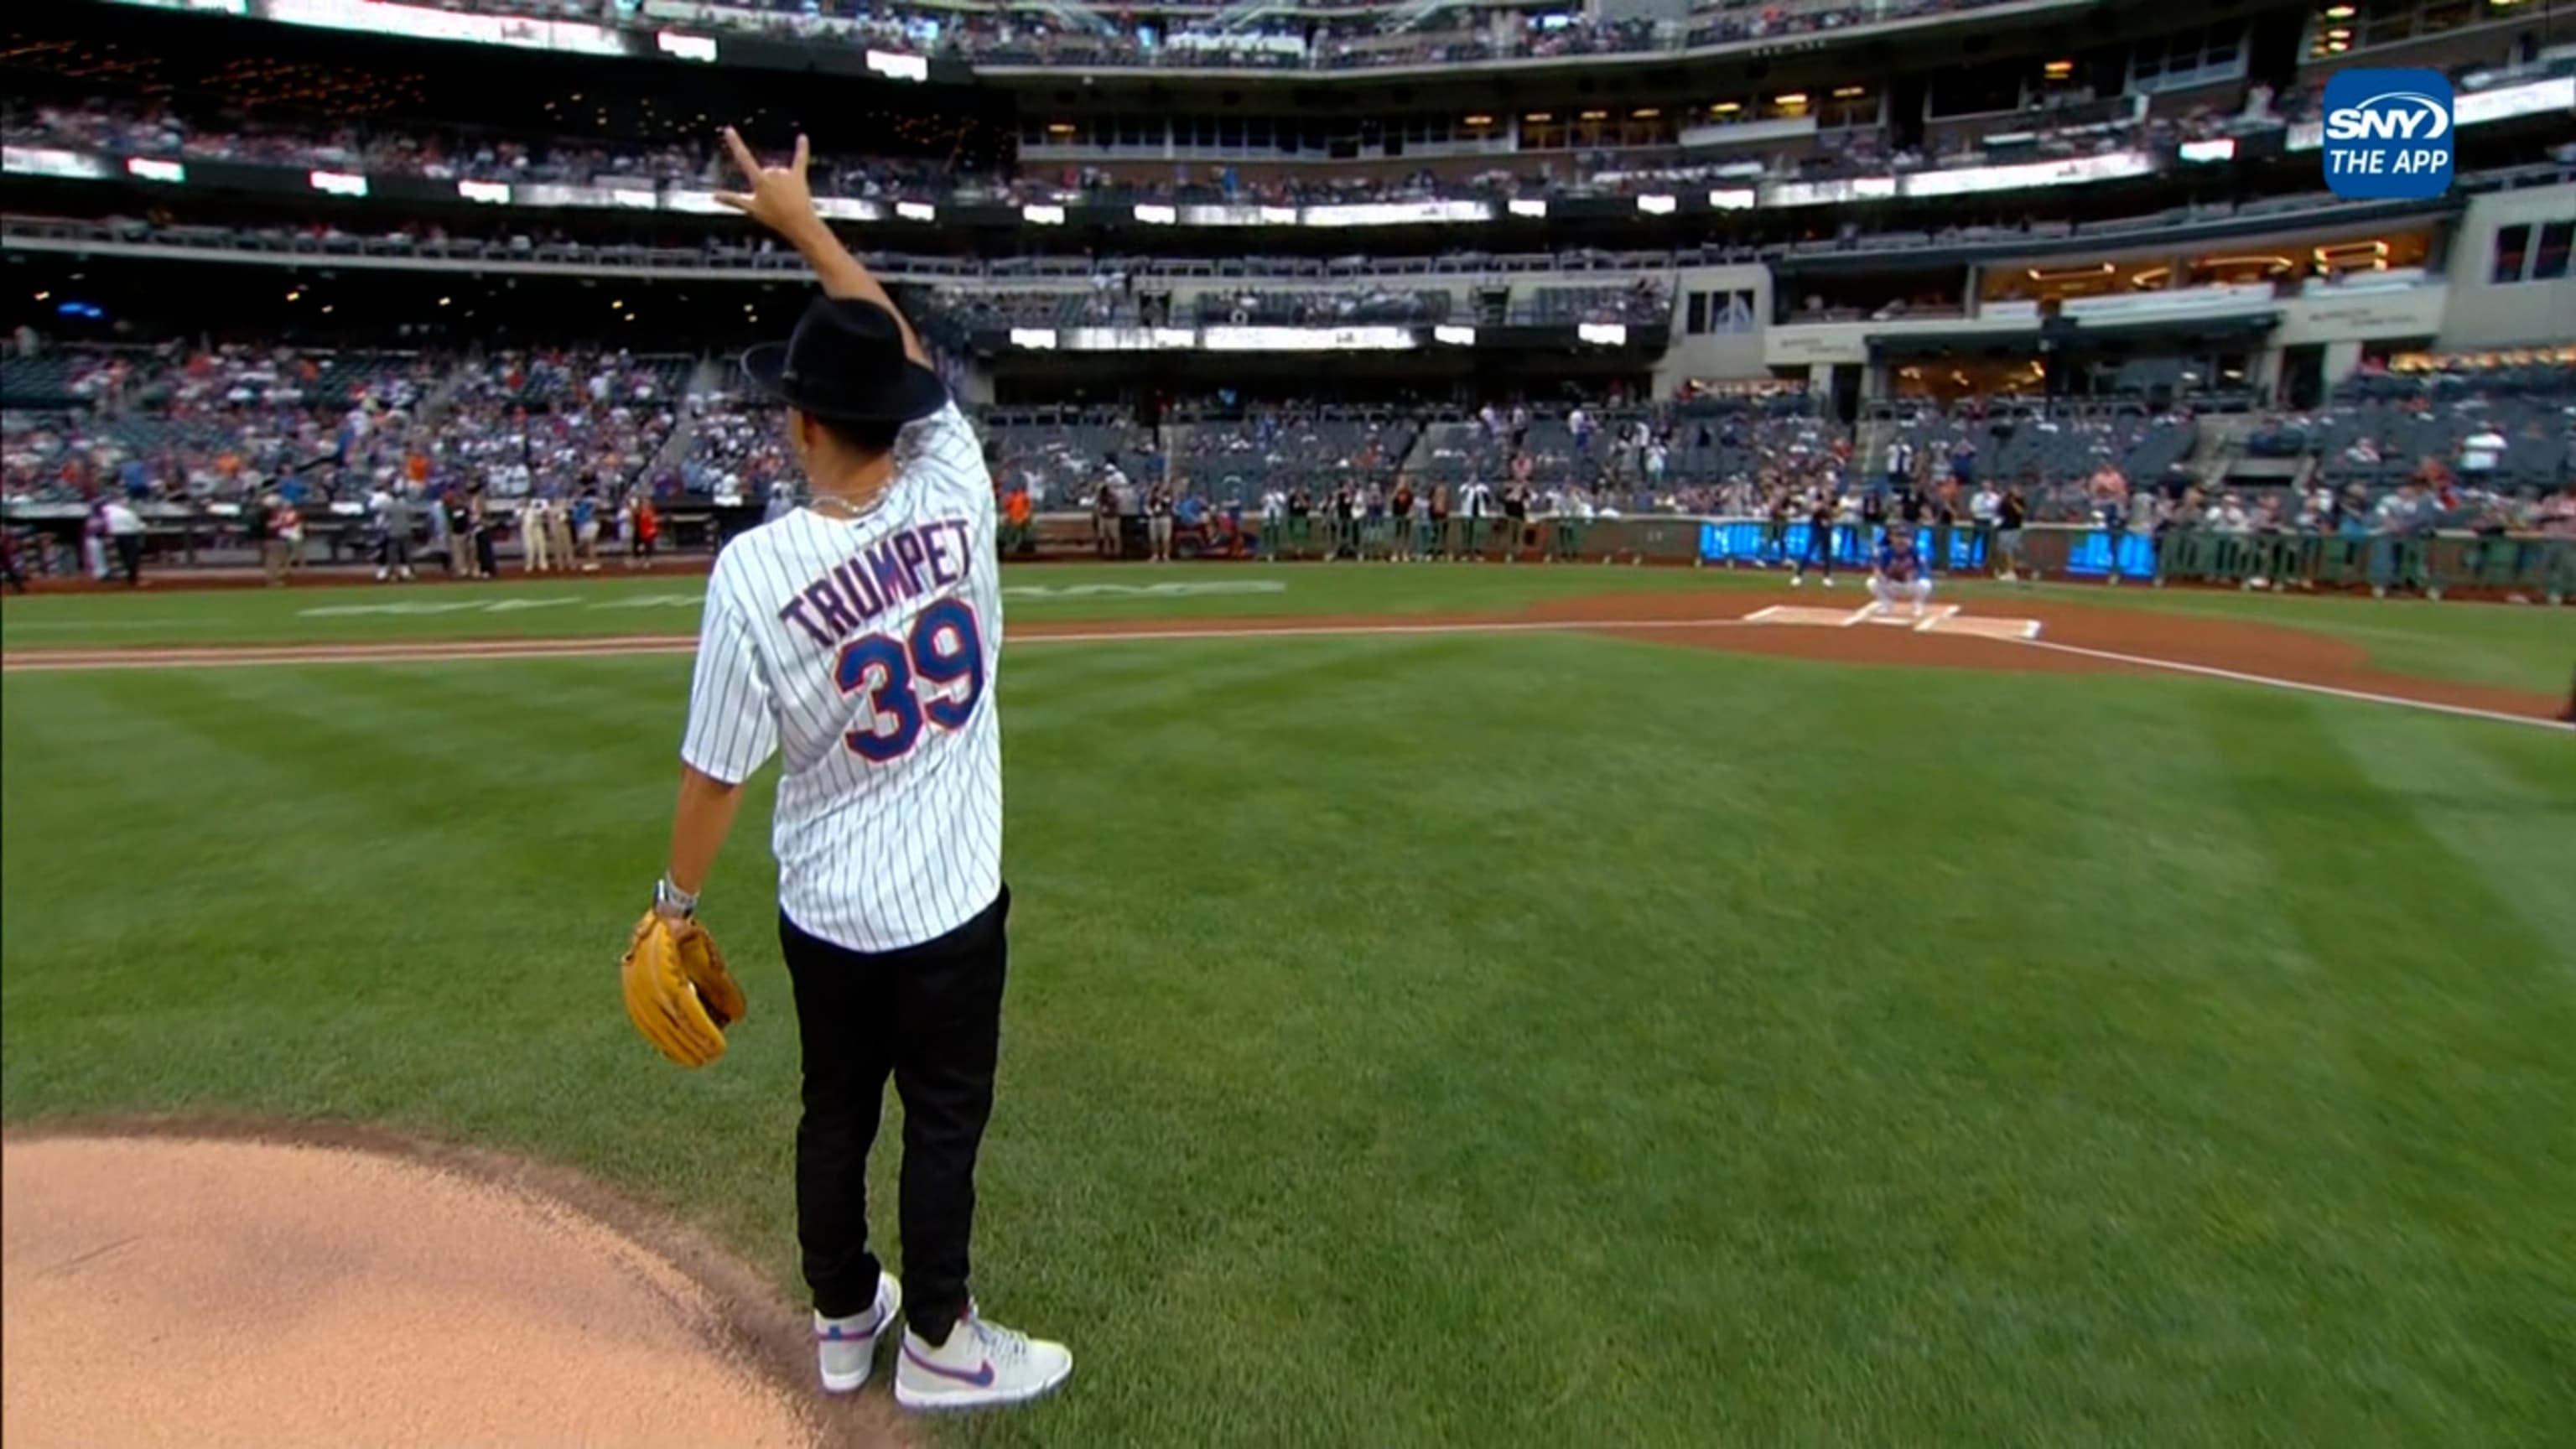 See Edwin Diaz take the mound for the Mets to the live sounds of